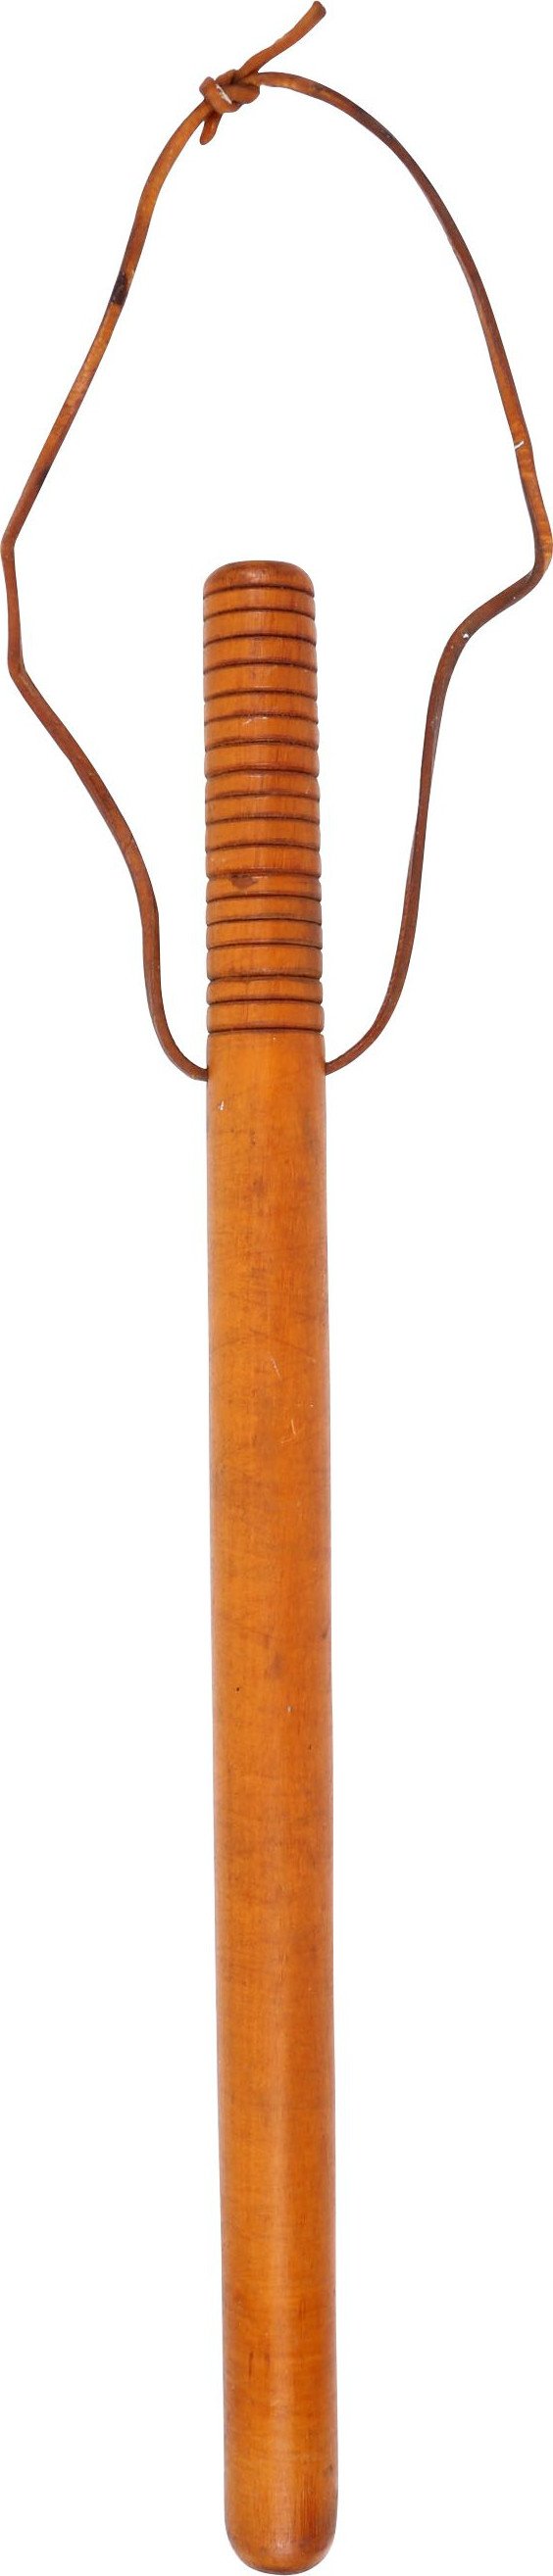 ANTIQUE BILLY CLUB OR TRUNCHEON - WAS $155.00, NOW $108.50 - Fagan Arms